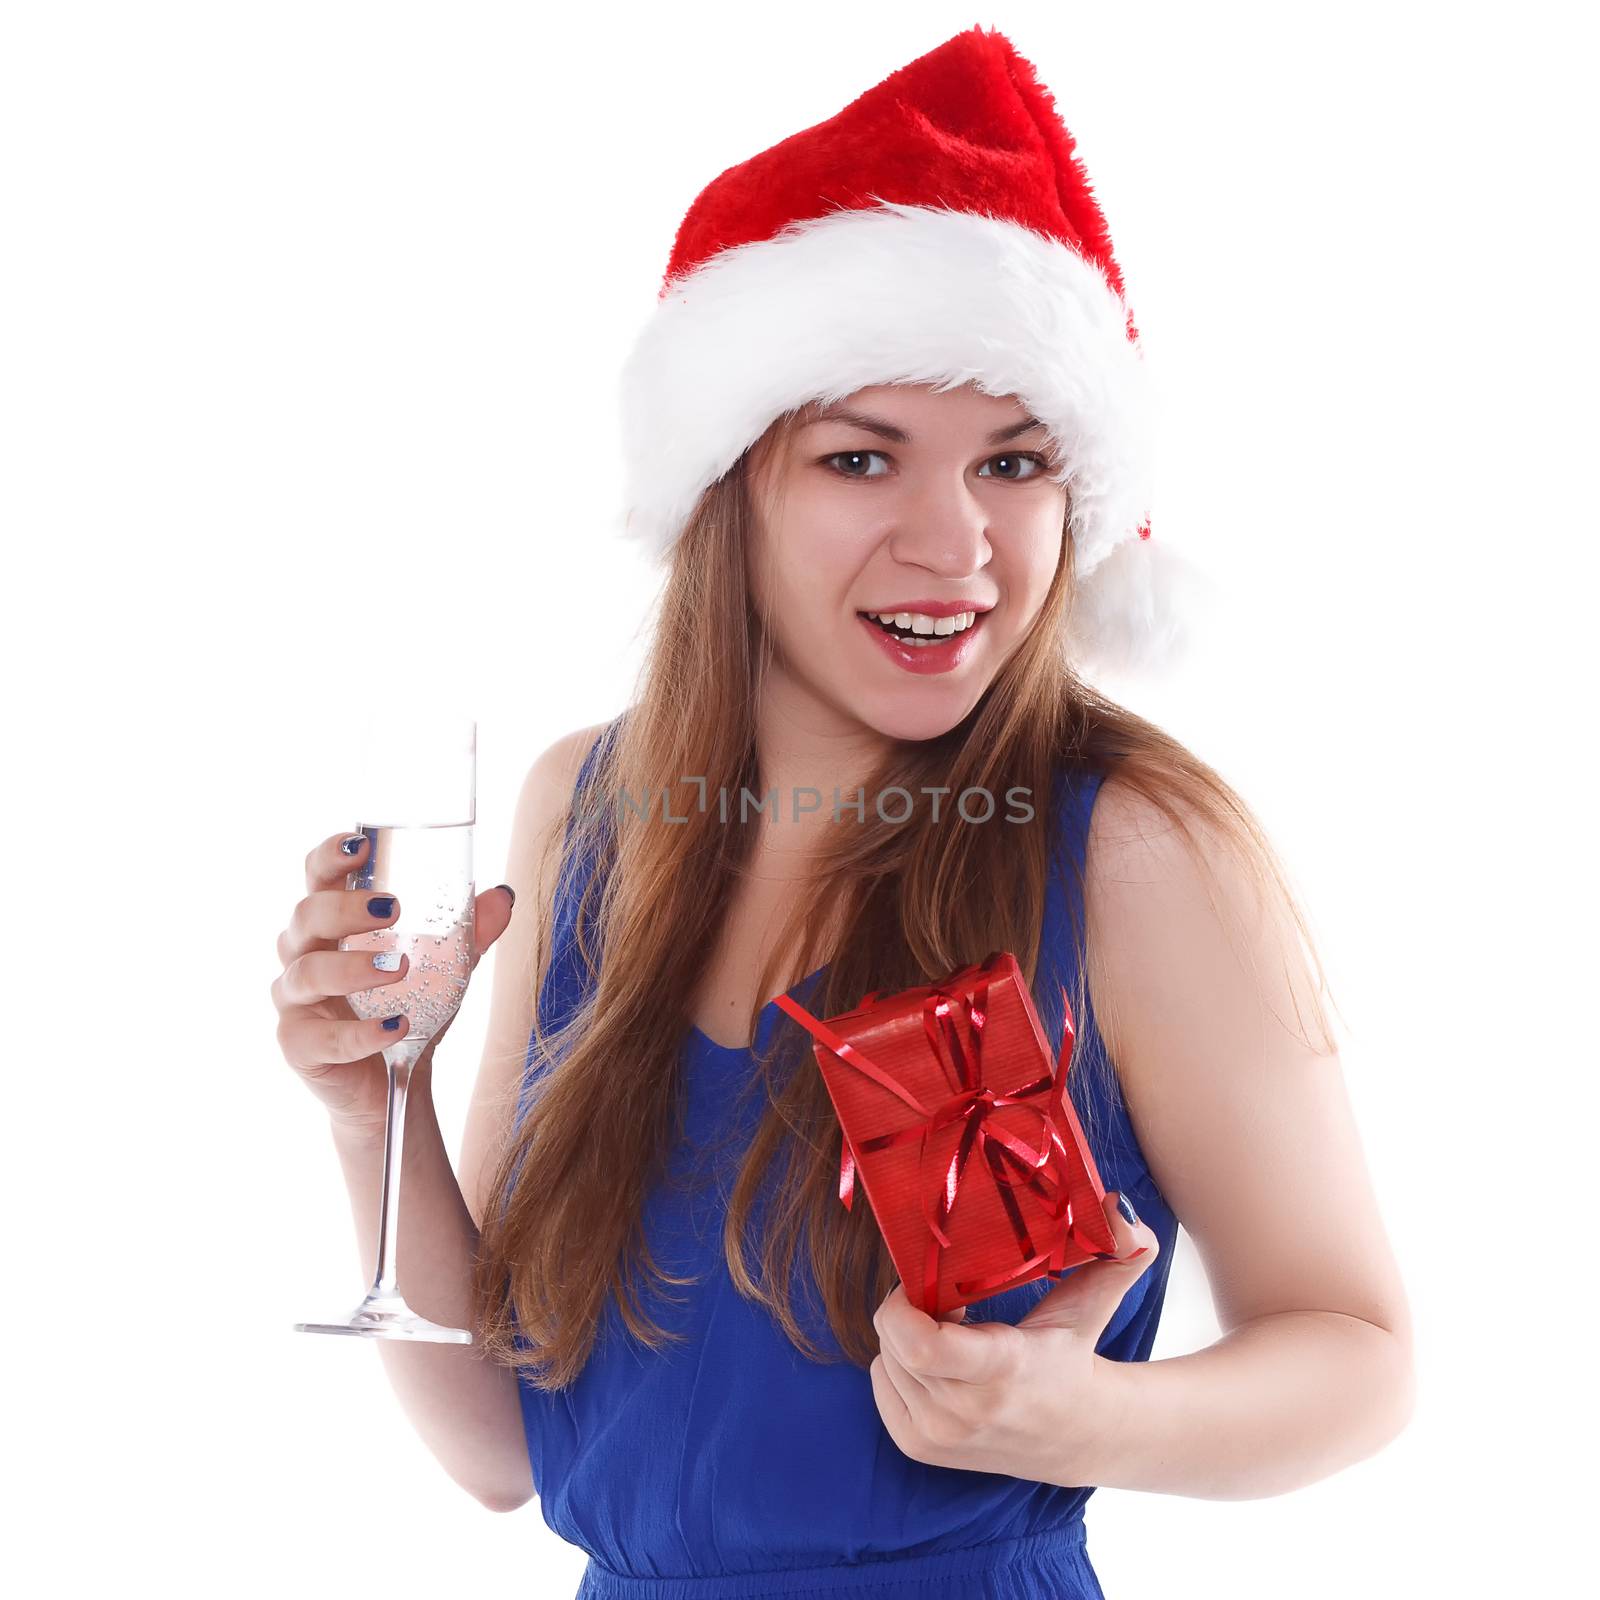 girl in a red Christmas hat with a gift and a glass of champagne on a white background. Isolate.